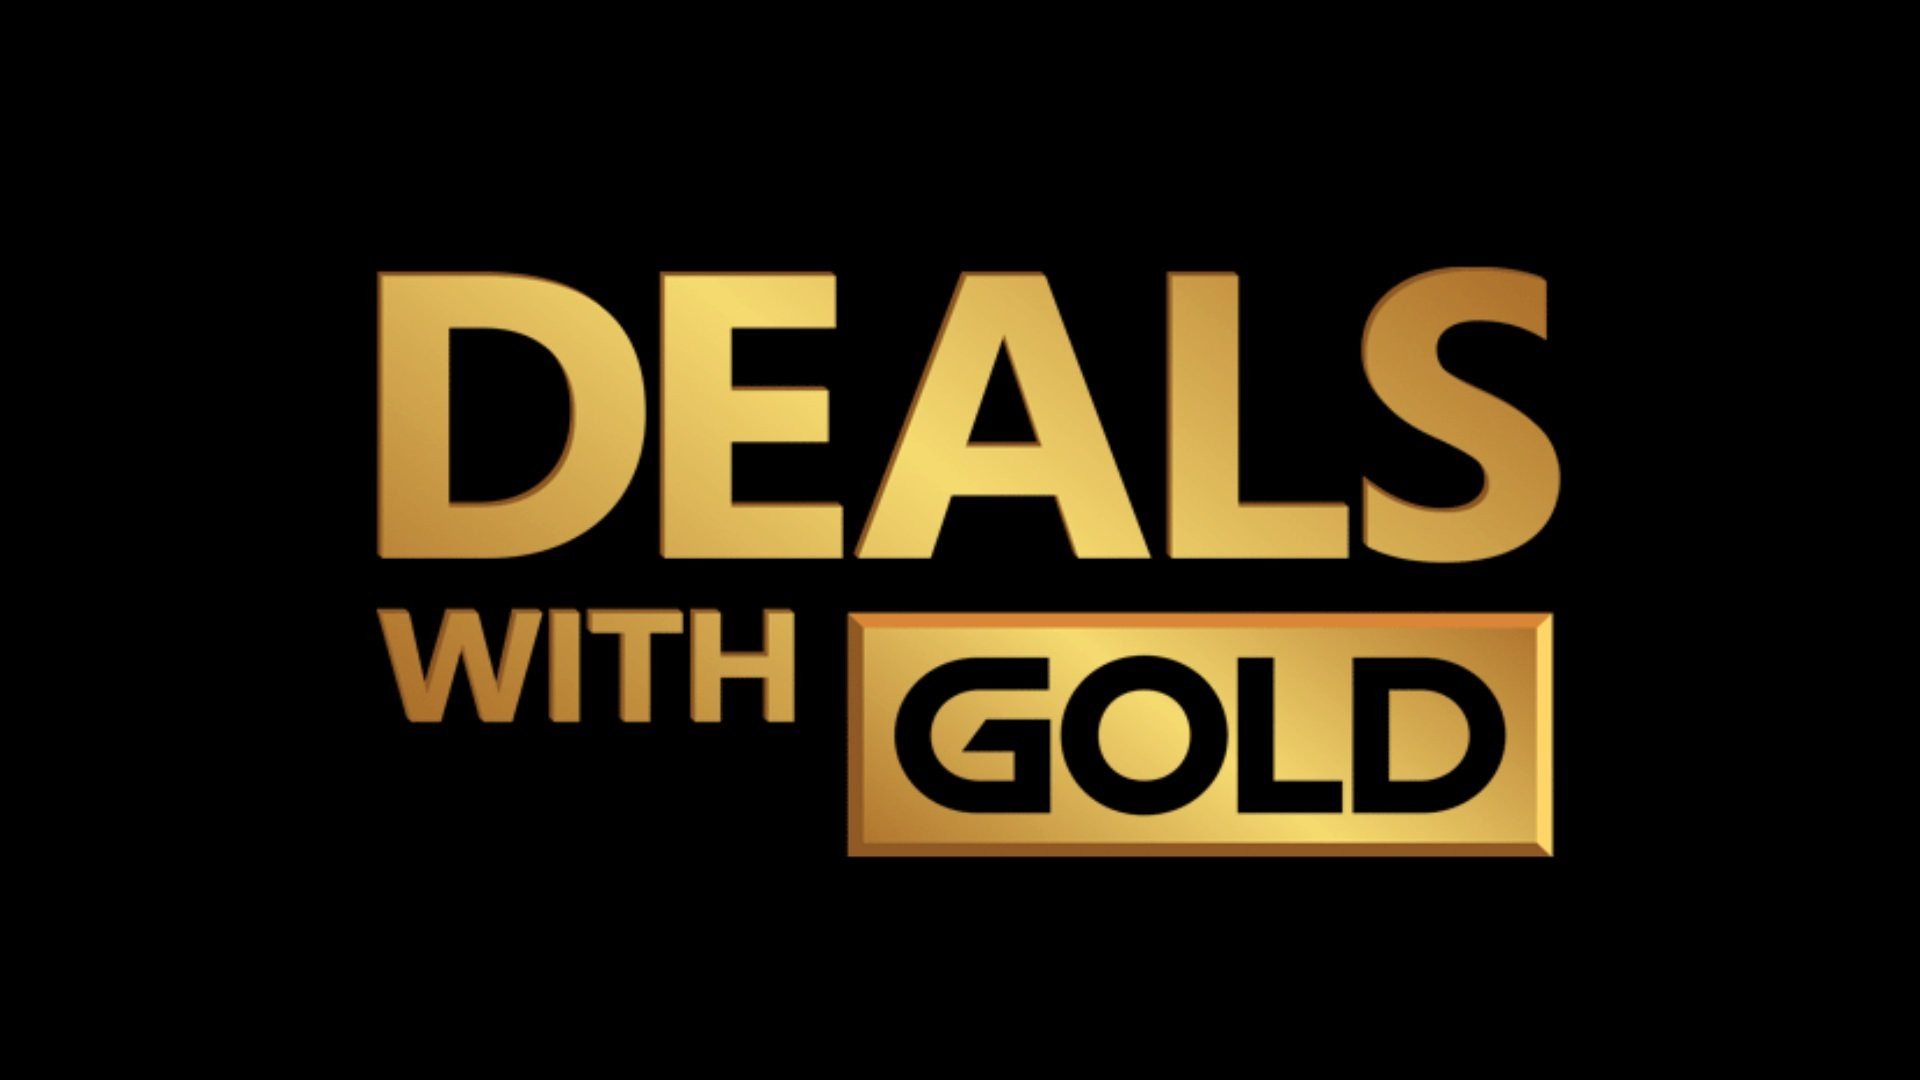 Deals with Gold semaine 9